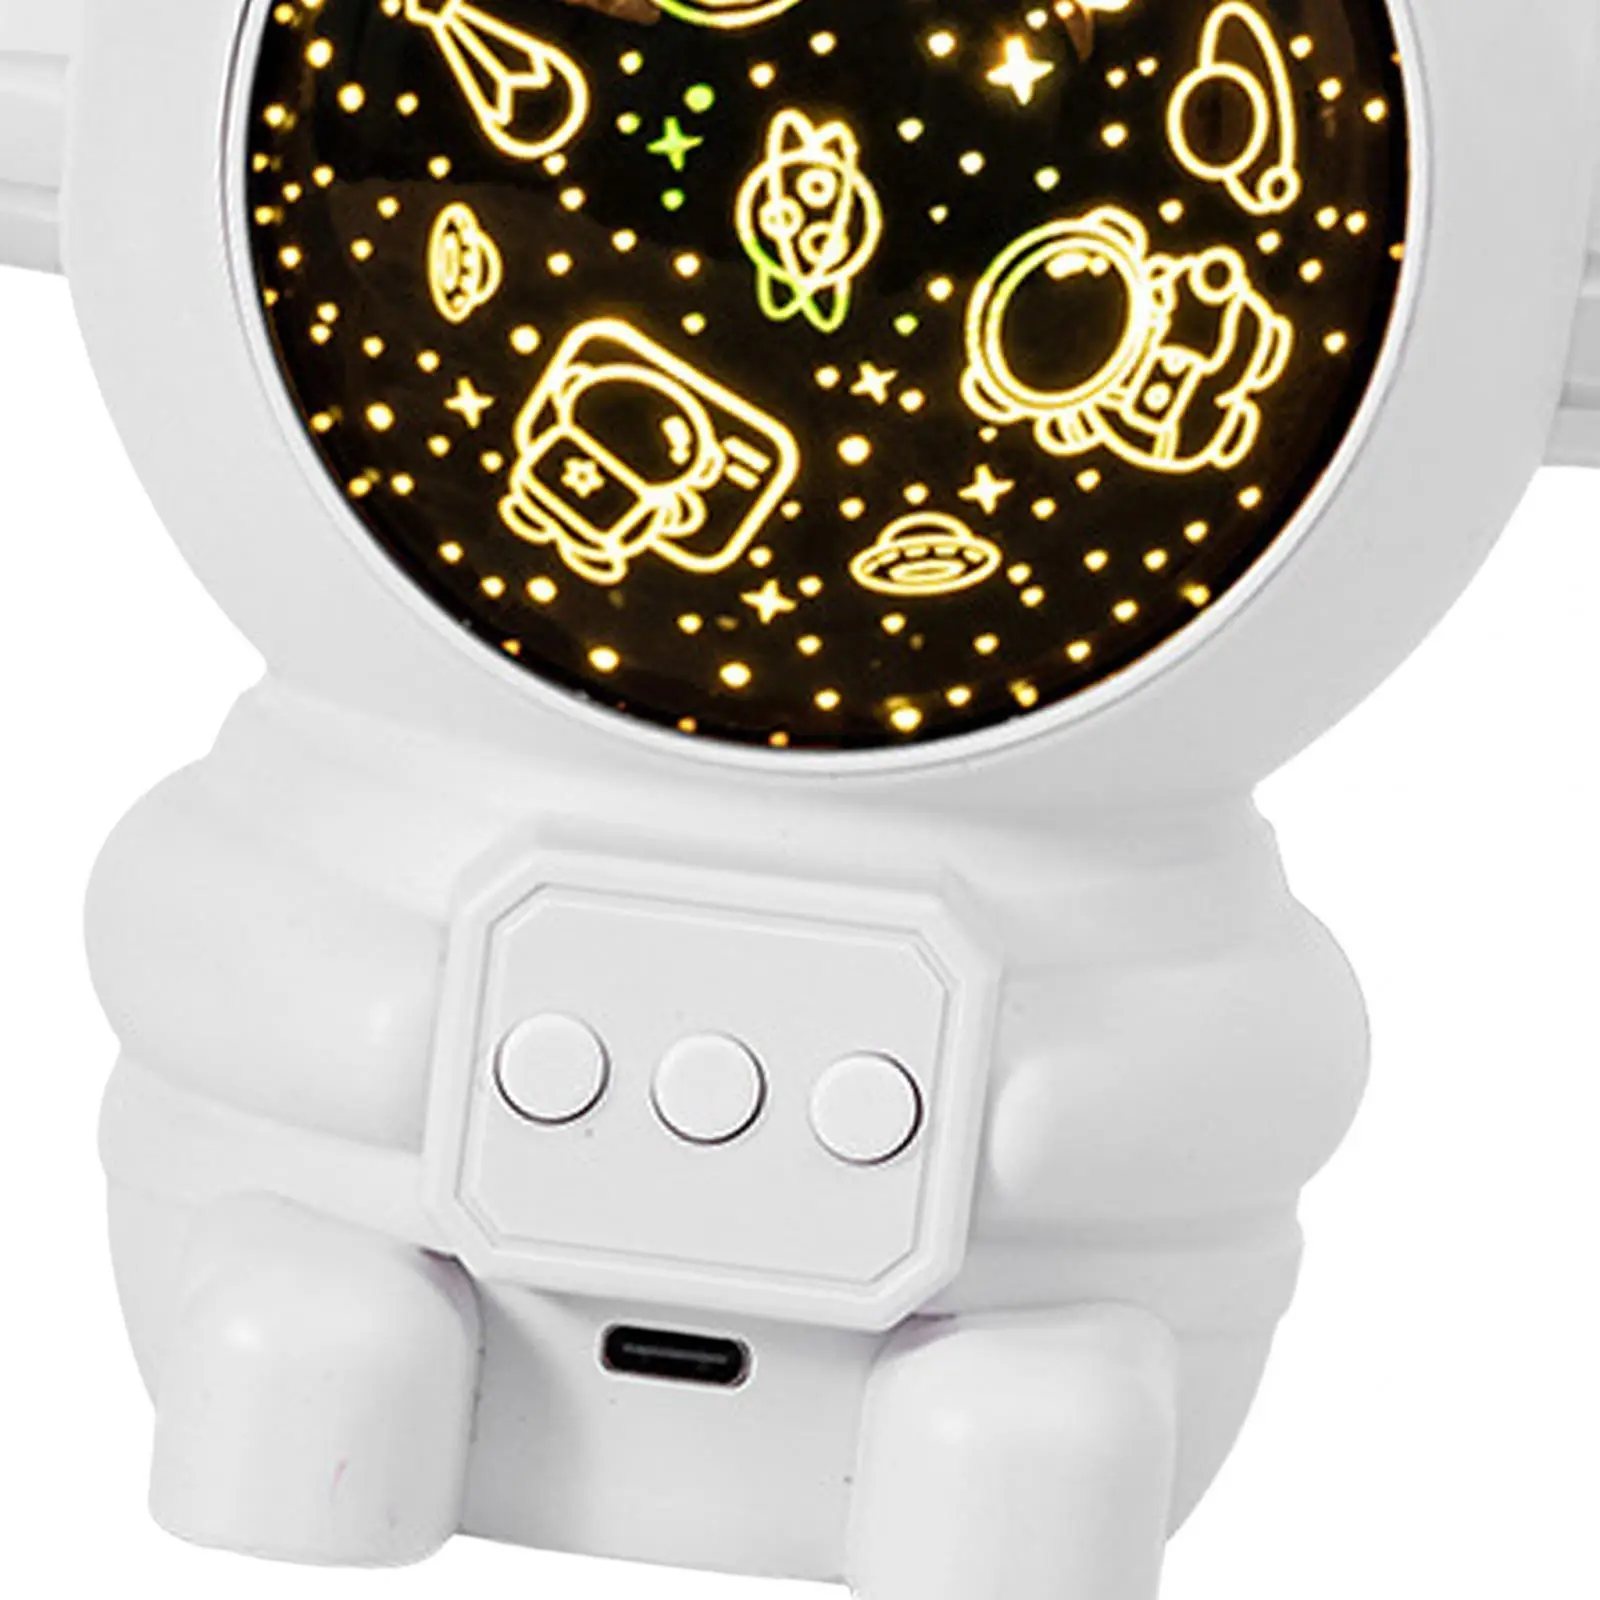 Galaxy Projector Decor Space Projector Astronaut Light Projector for Toddlers Girls Boys Kids Bedroom Children Holiday Gift